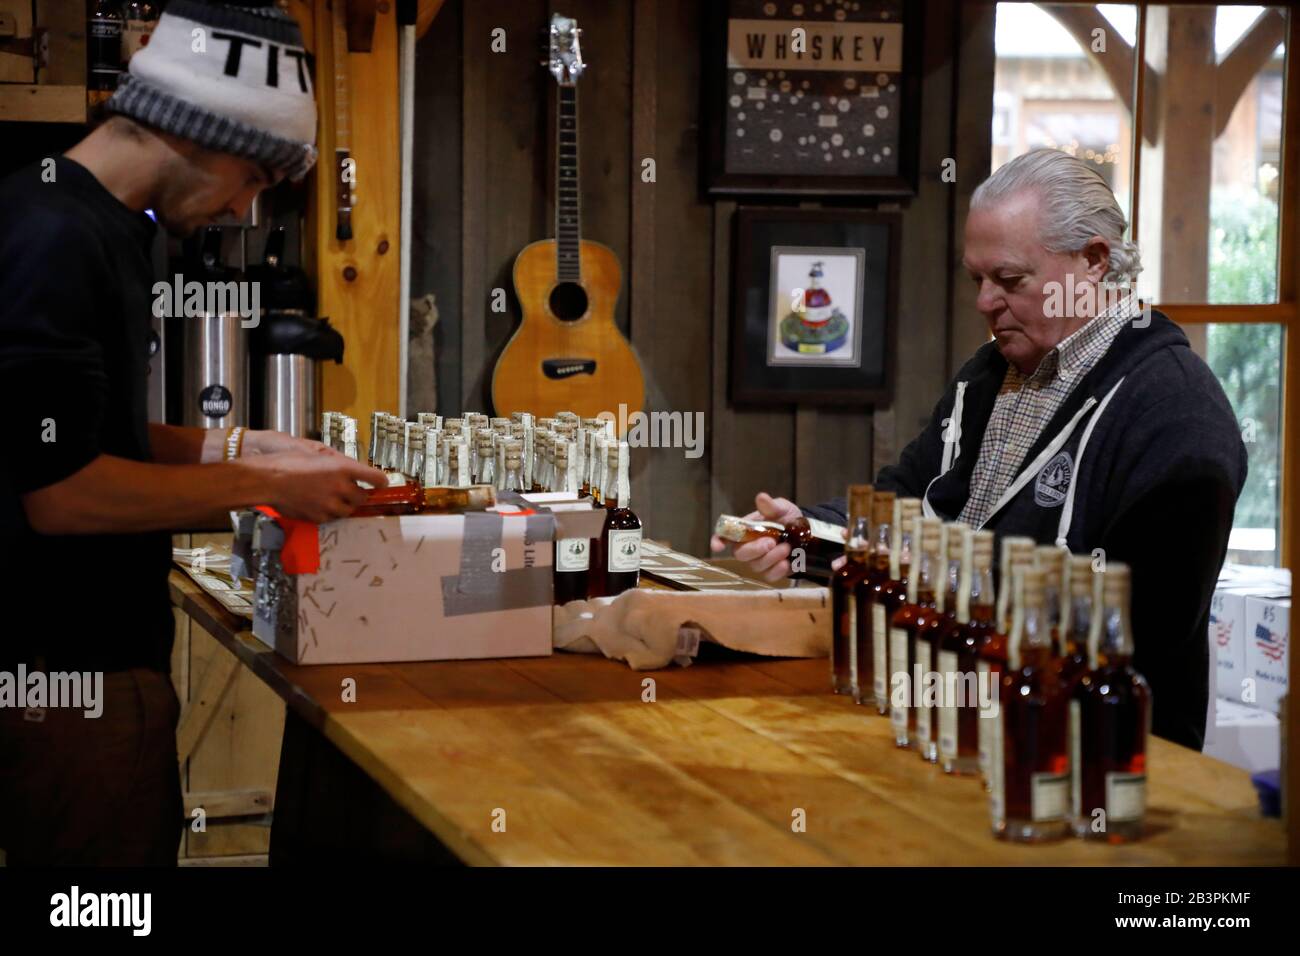 Workers hand labeling whiskey bottle inside Leiper's Fork Distillery.Franklin.Tennessee.USA Stock Photo